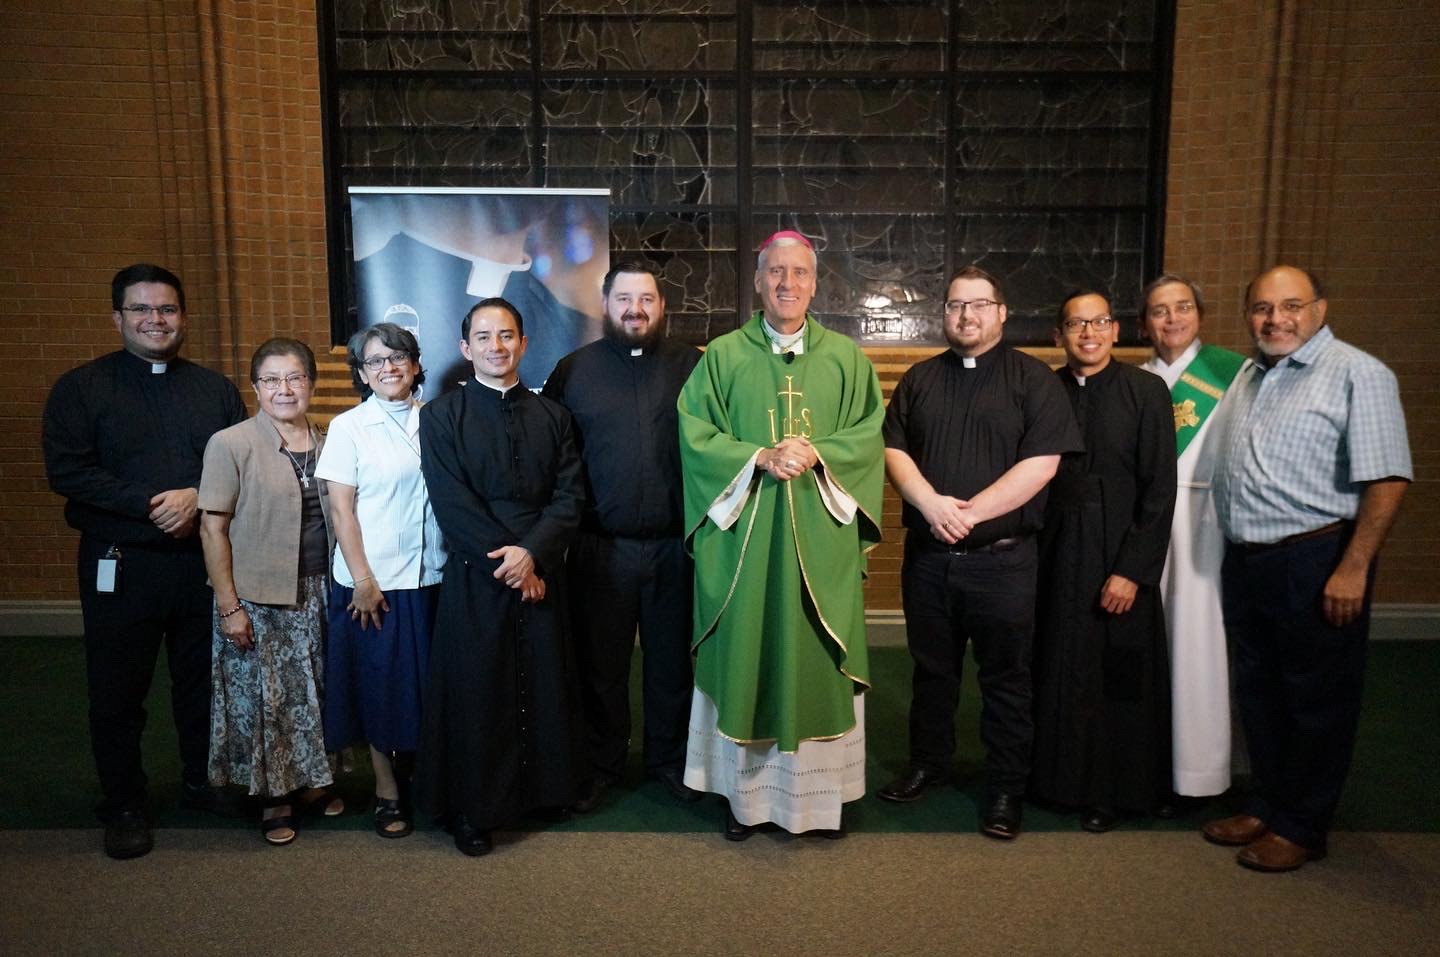 National Vocation Awareness Week Highlights the Diversity and Unity of Vocations in the Church